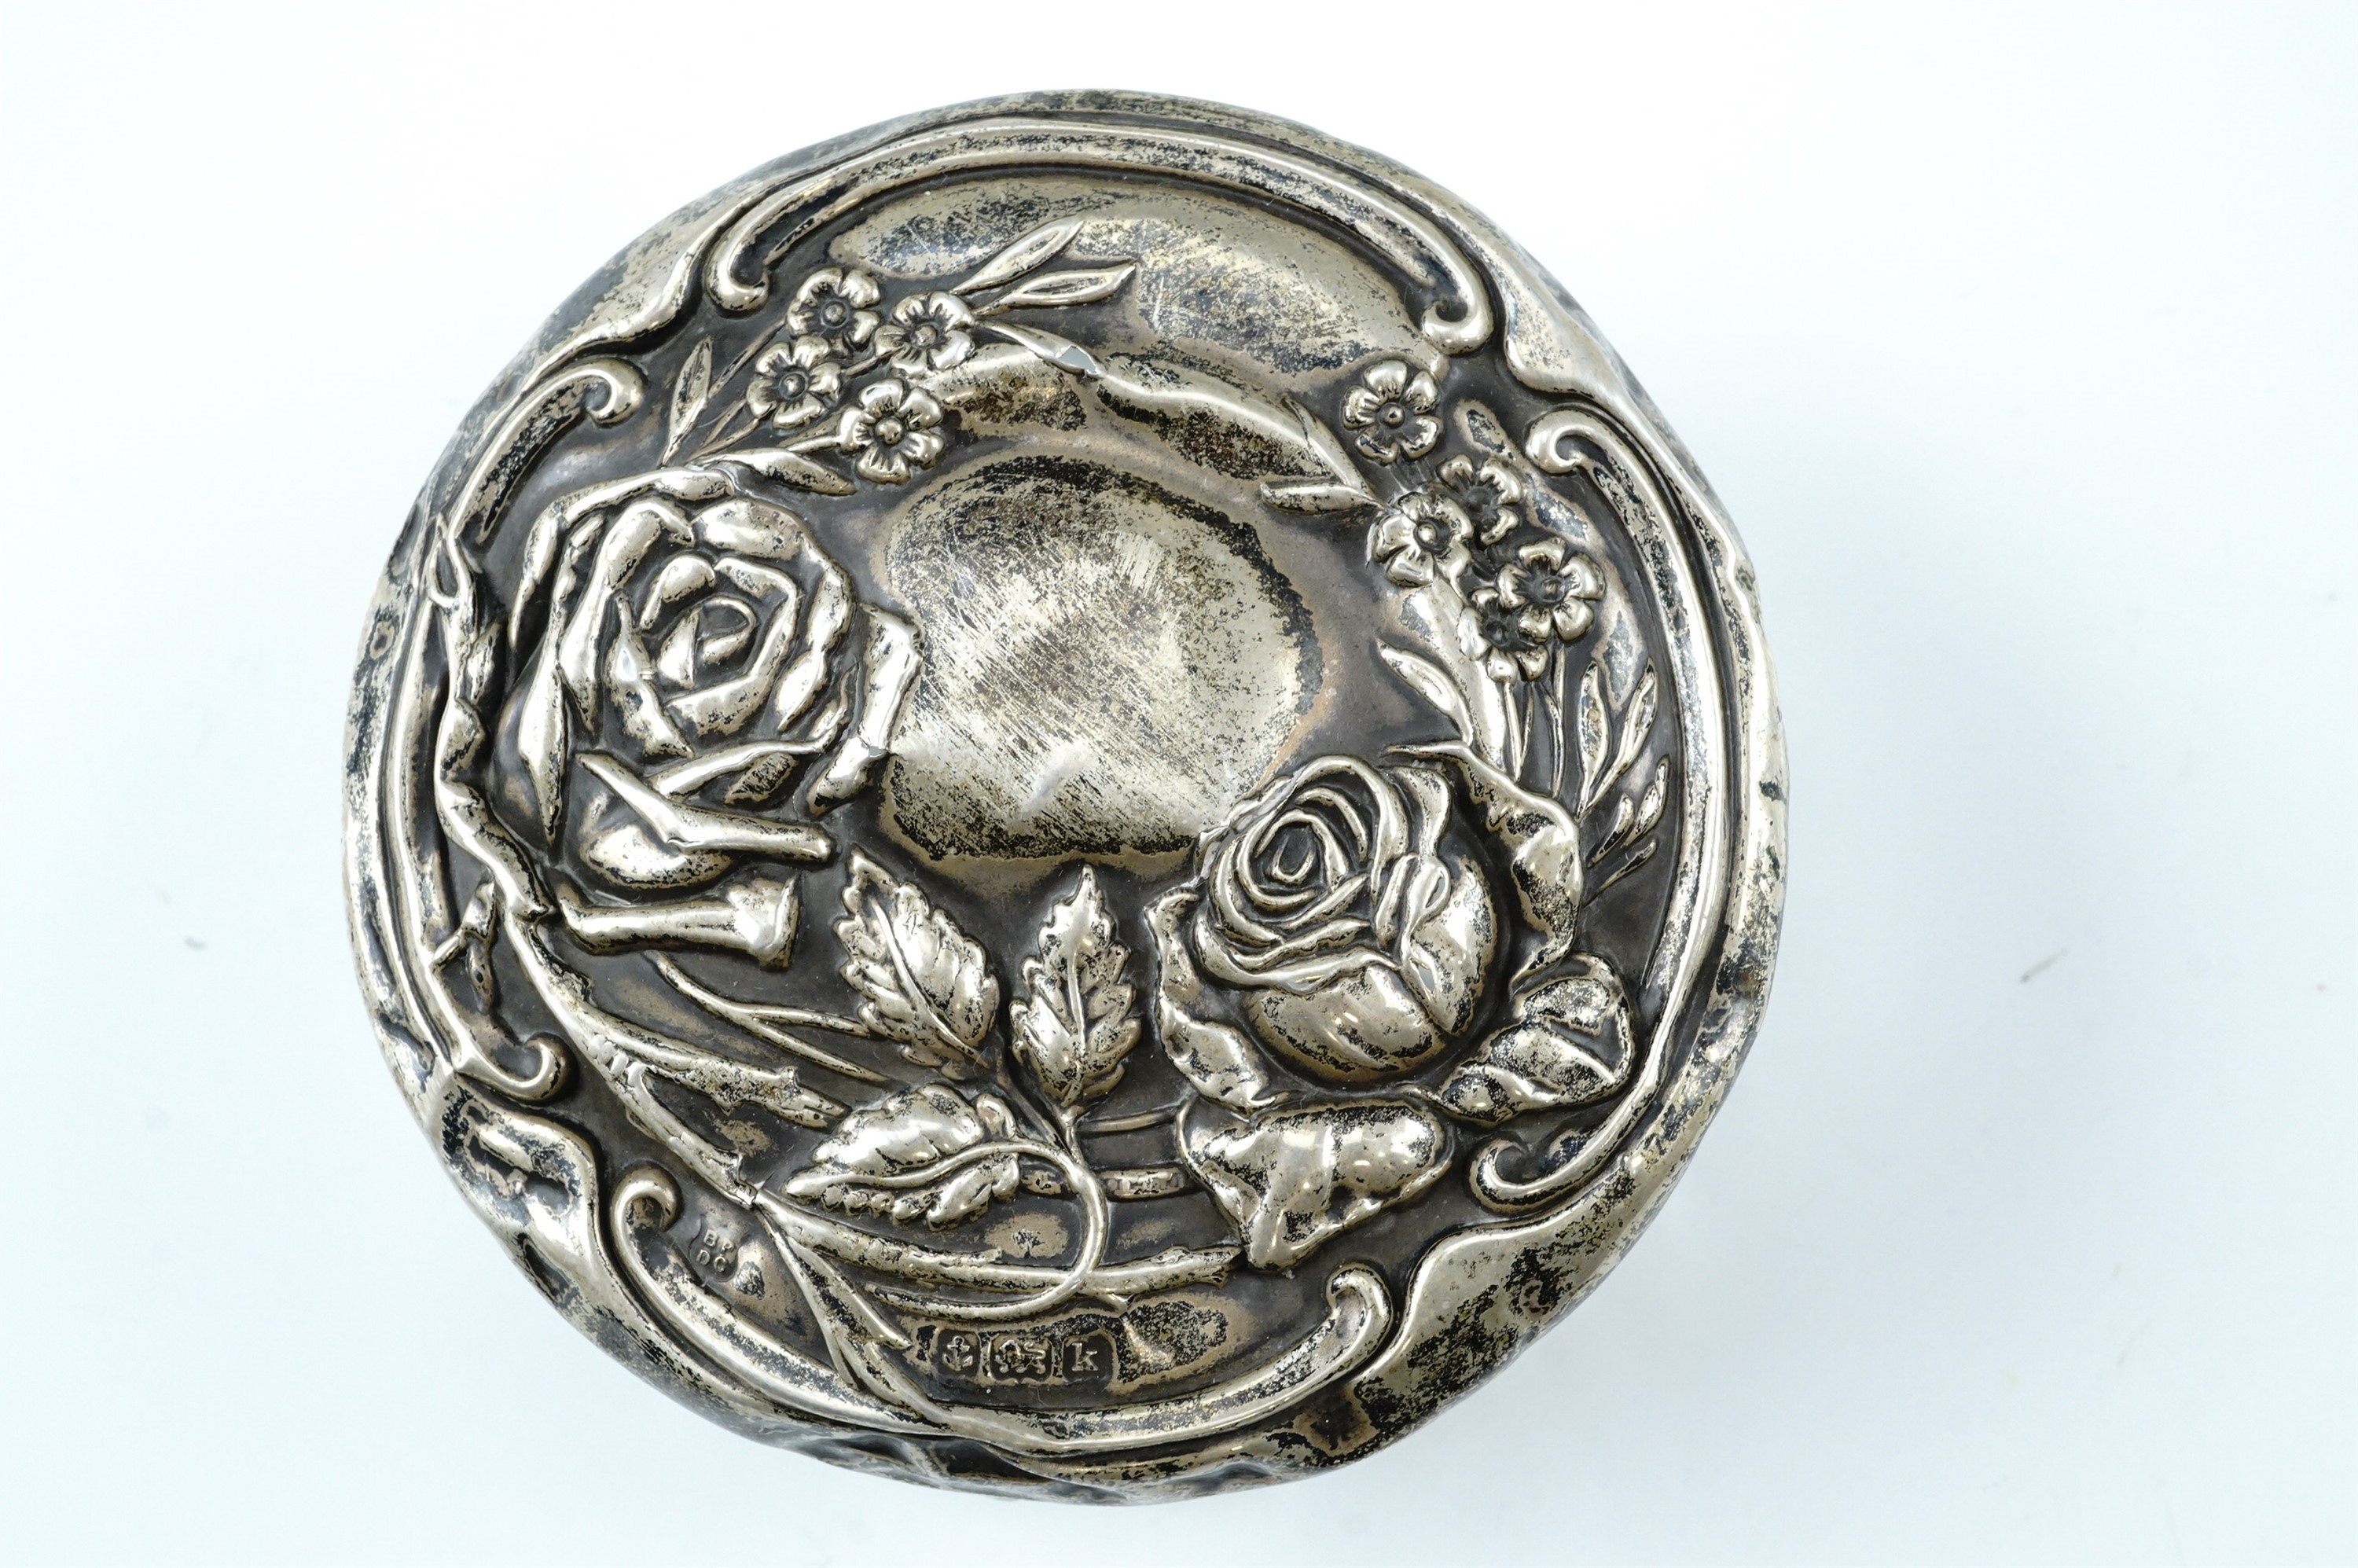 A silver-lidded cut glass dressing table tidy, the cover relief decorated in depiction of roses - Image 4 of 4